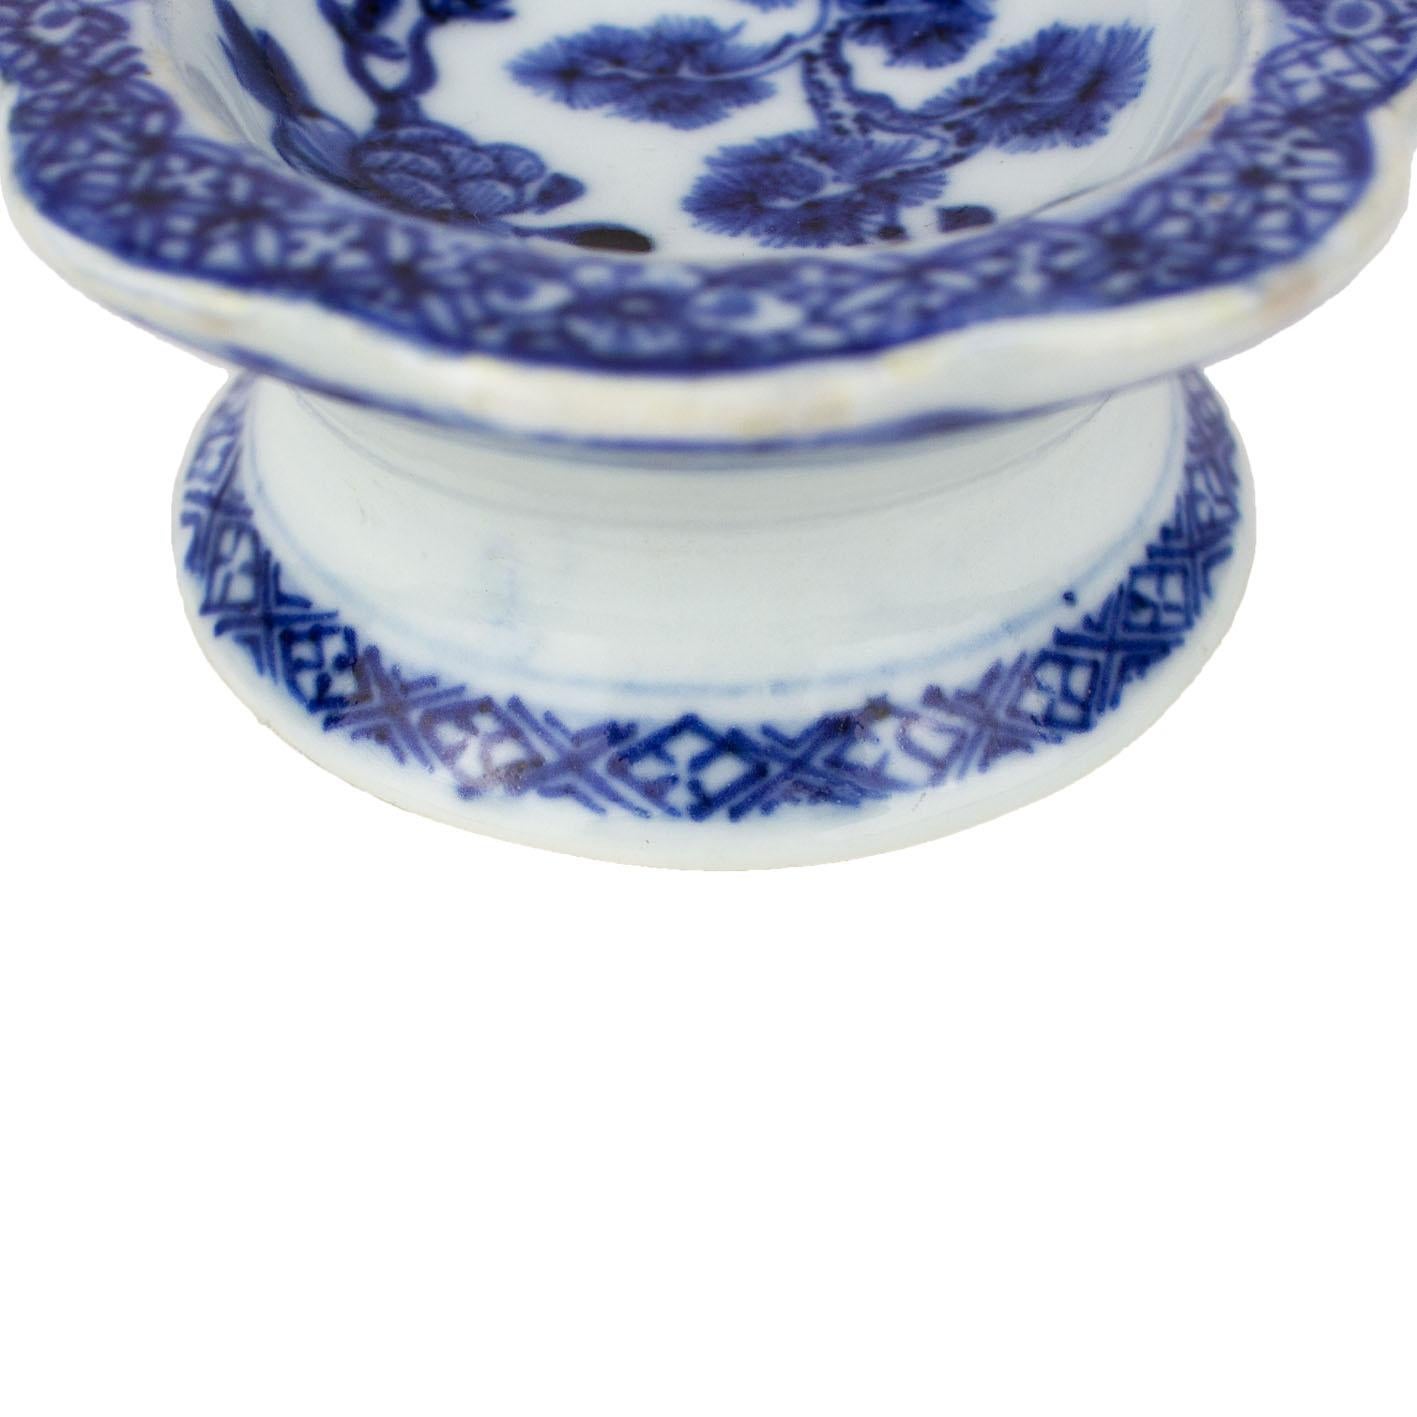 18th Century and Earlier Pair of Chinese Export Porcelain Salt-Cellars, Qianlong Period '1736-1795'